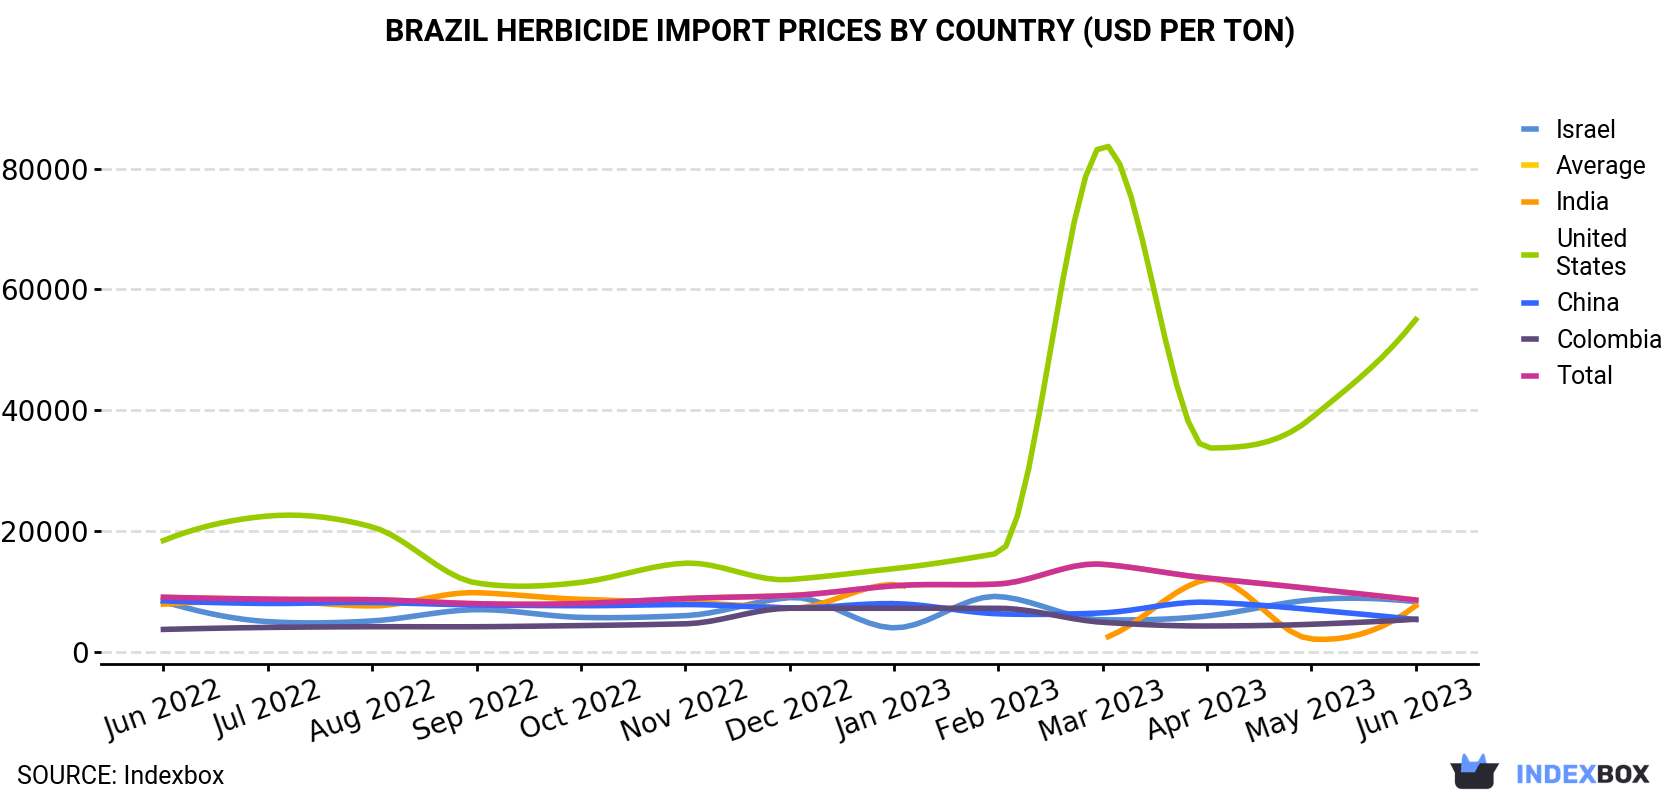 Brazil Herbicide Import Prices By Country (USD Per Ton)